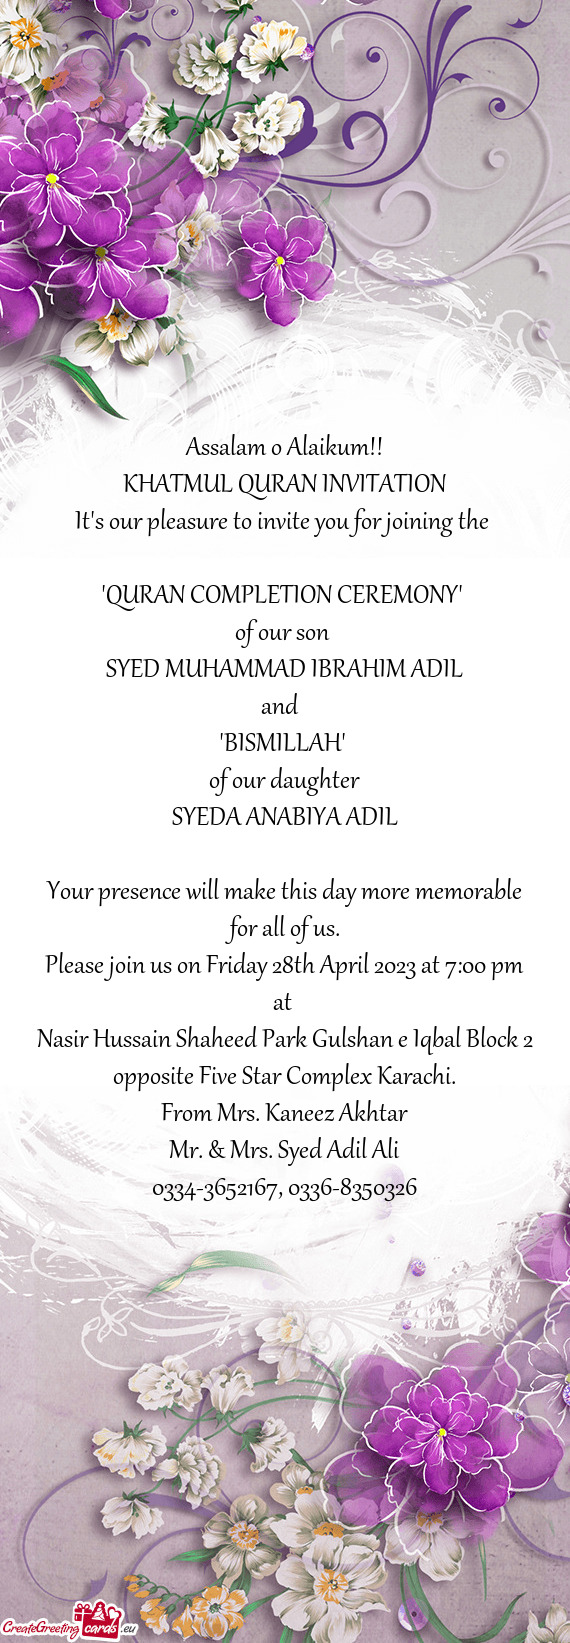 Please join us on Friday 28th April 2023 at 7:00 pm at